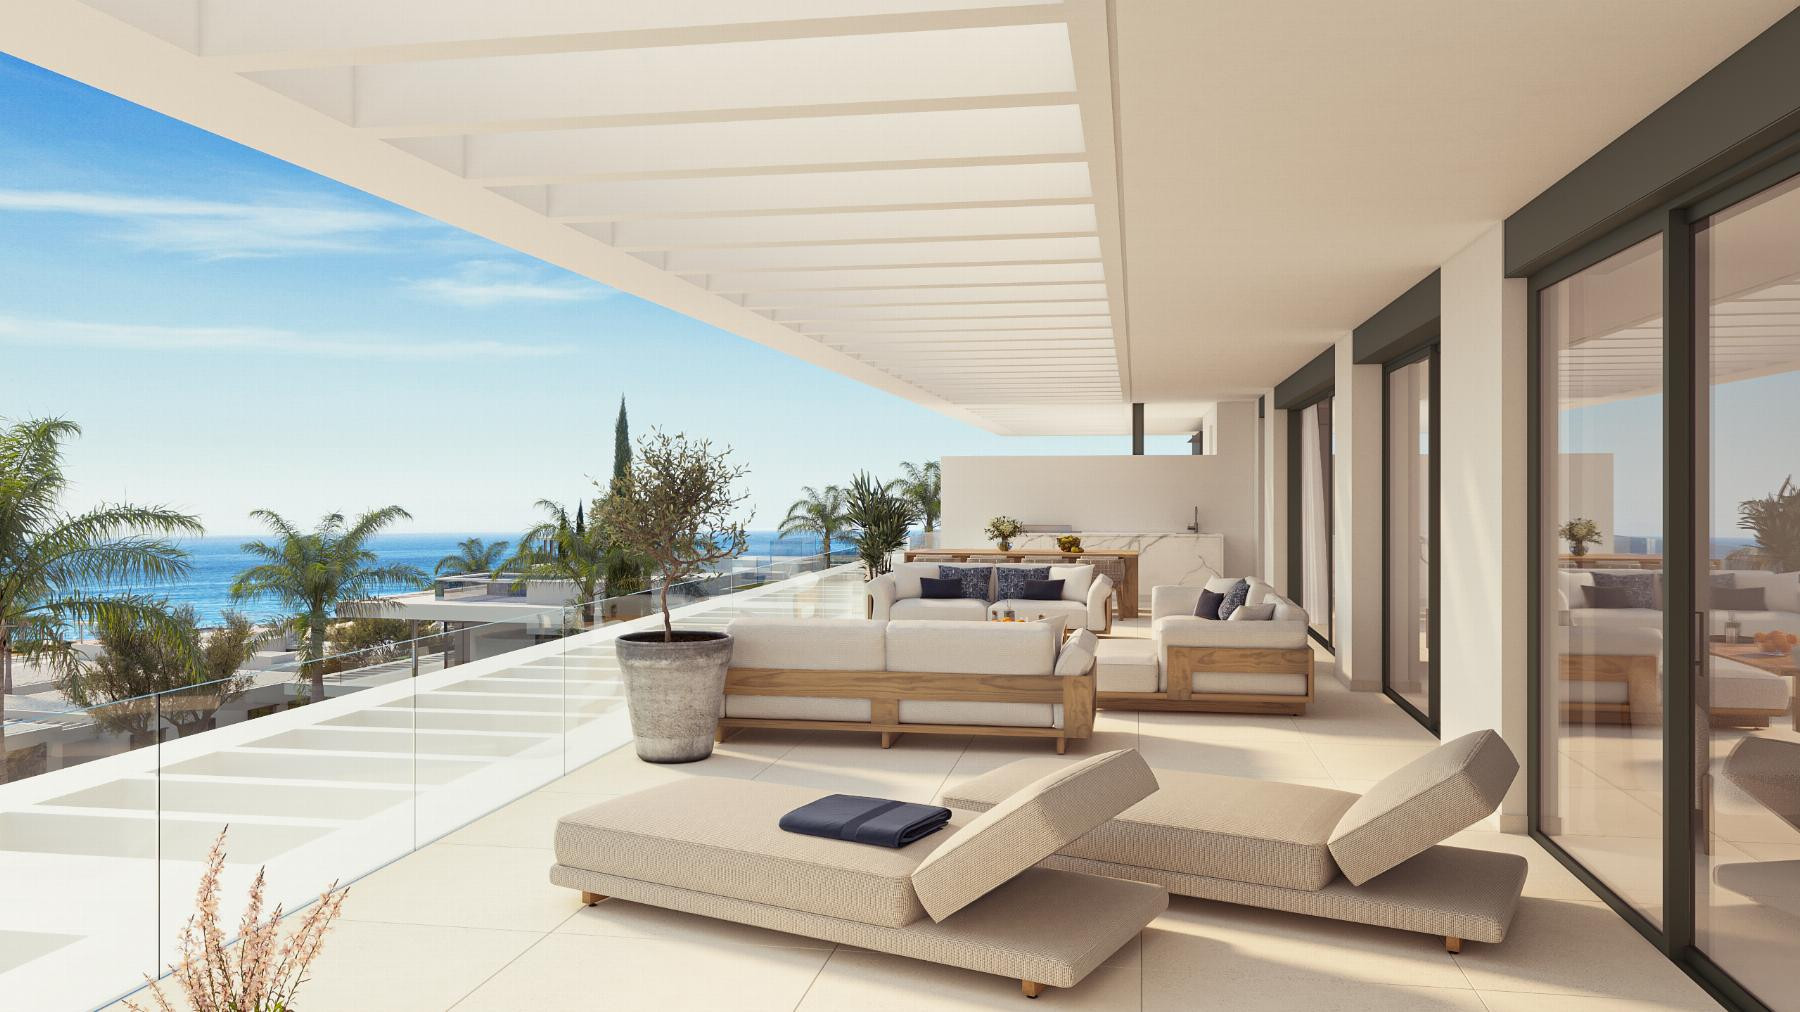 Stunning duplex penthouse in exclusive gated community 10 minutes from the center of Marbella and golf courses. | Image 2